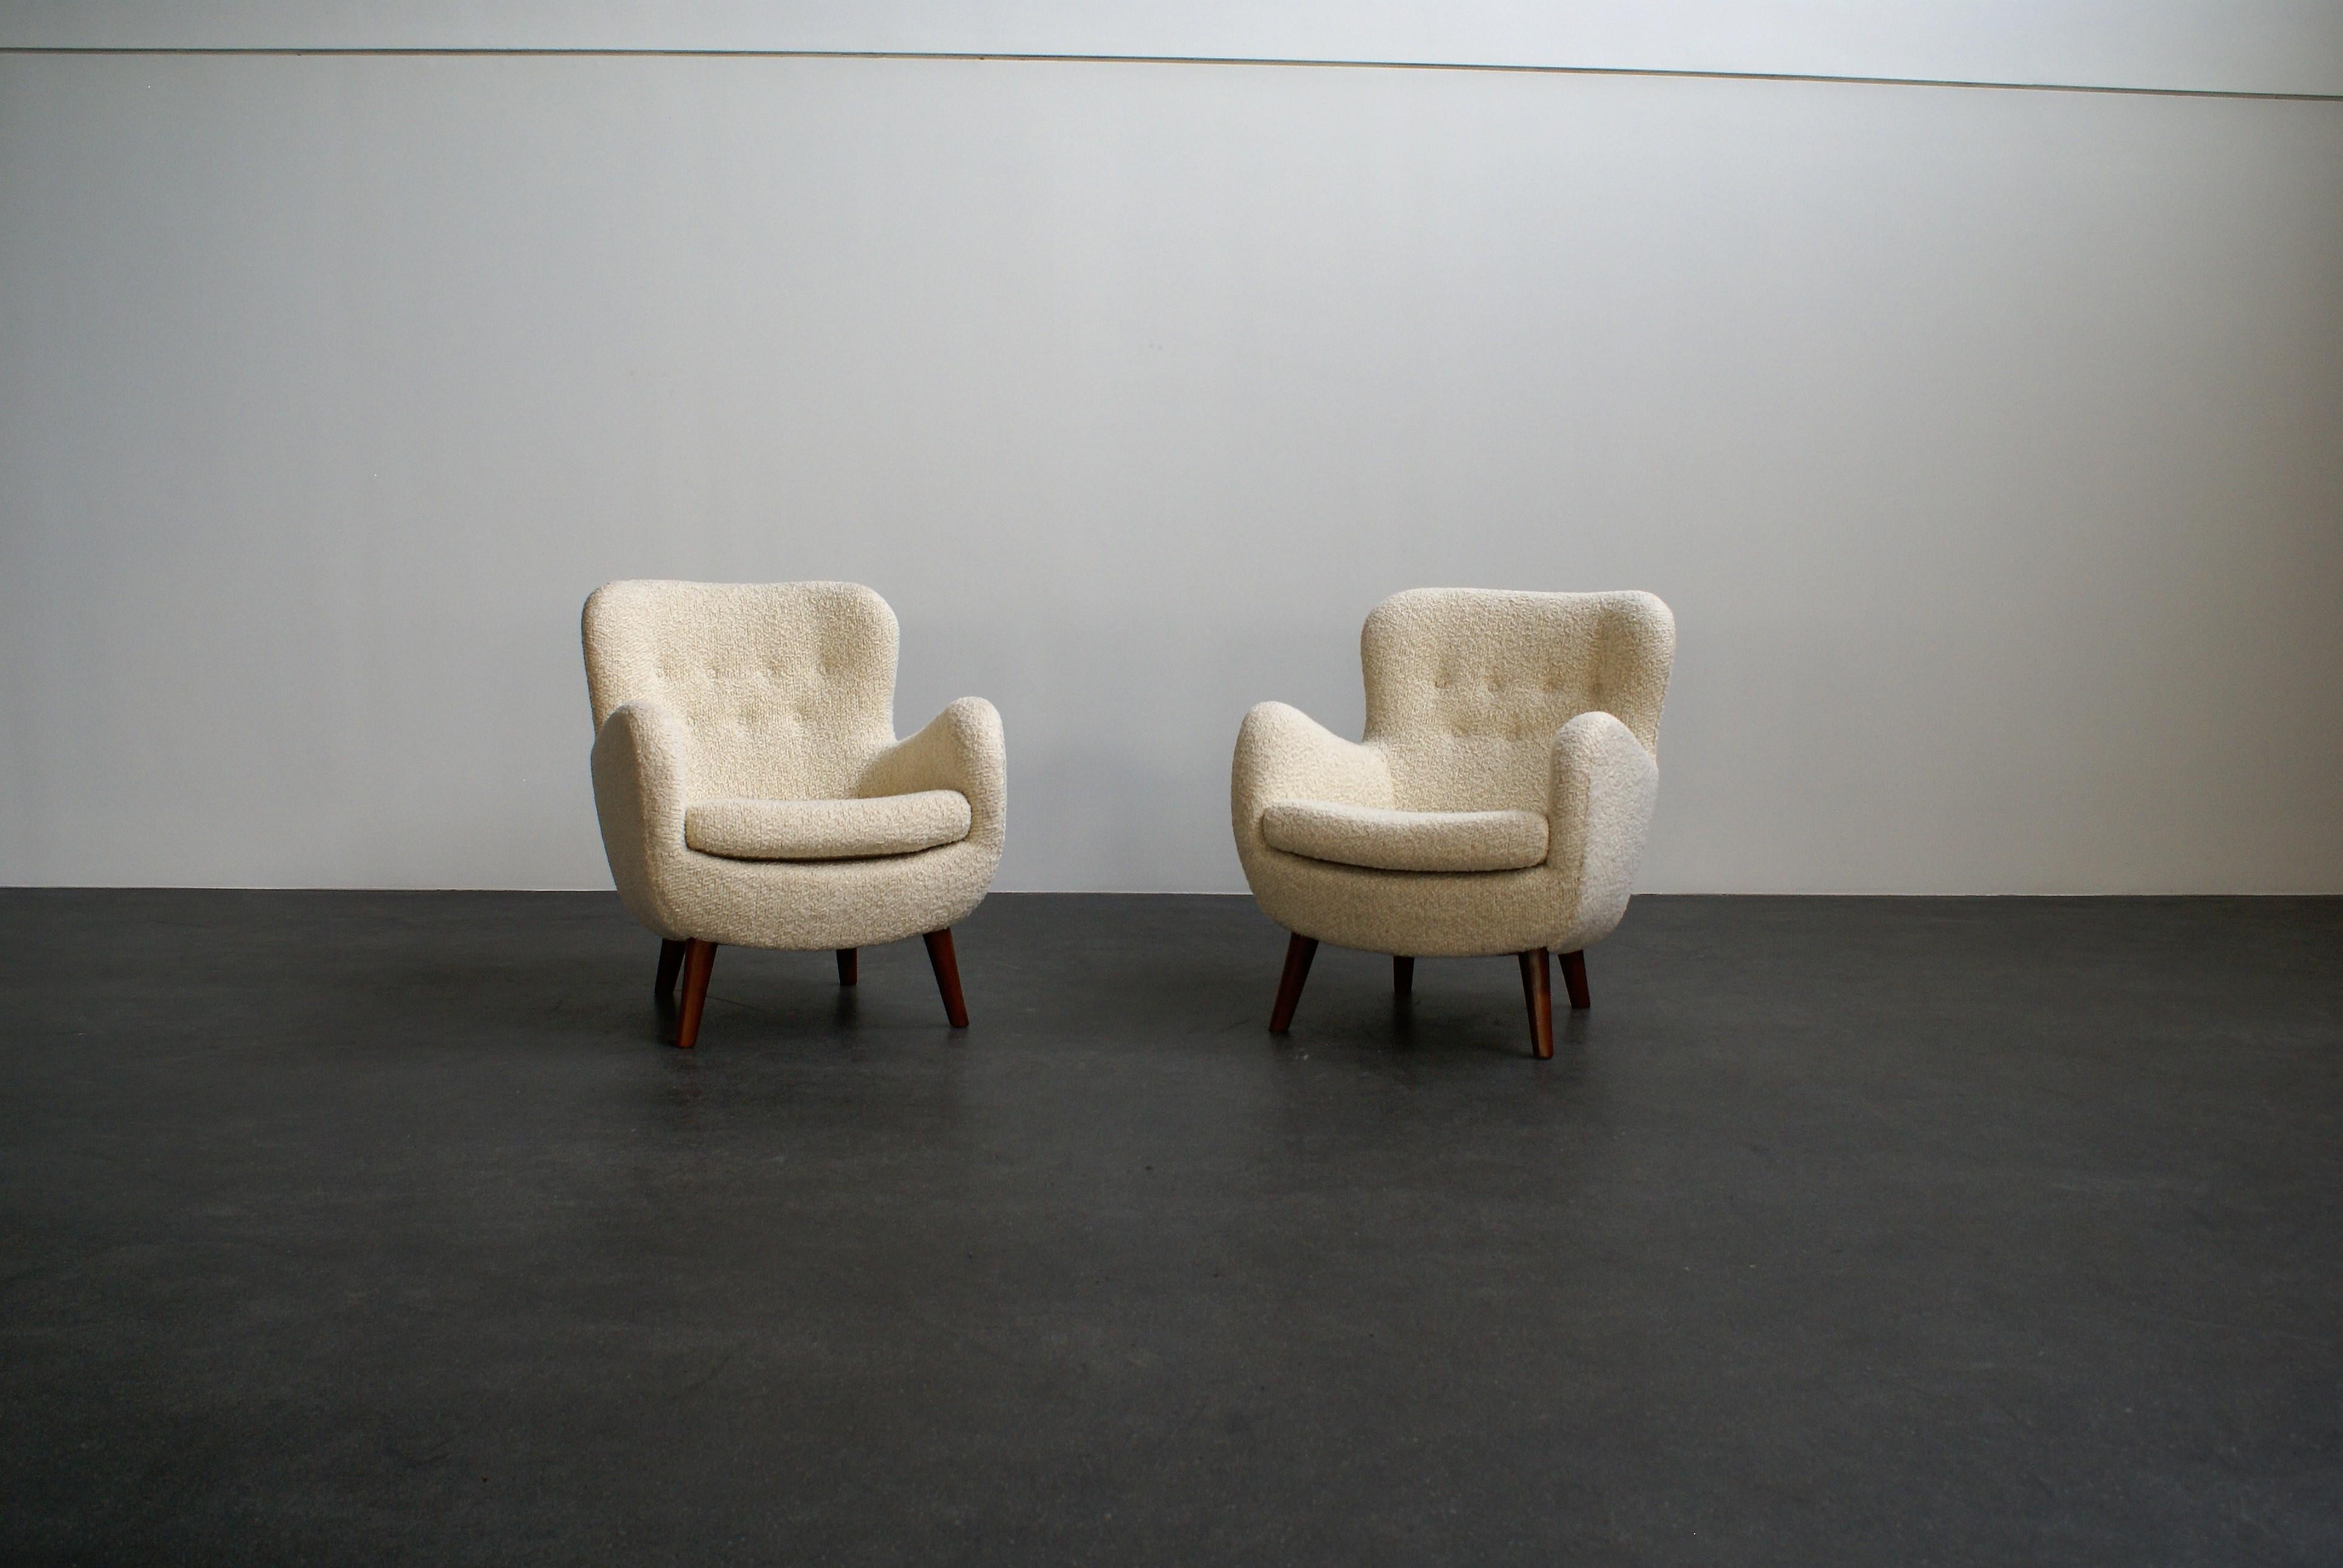 Pair of lounge chairs attributed to Frits Schlegel. Made in Denmark 1940s.

Recently refinished and reupholstered.